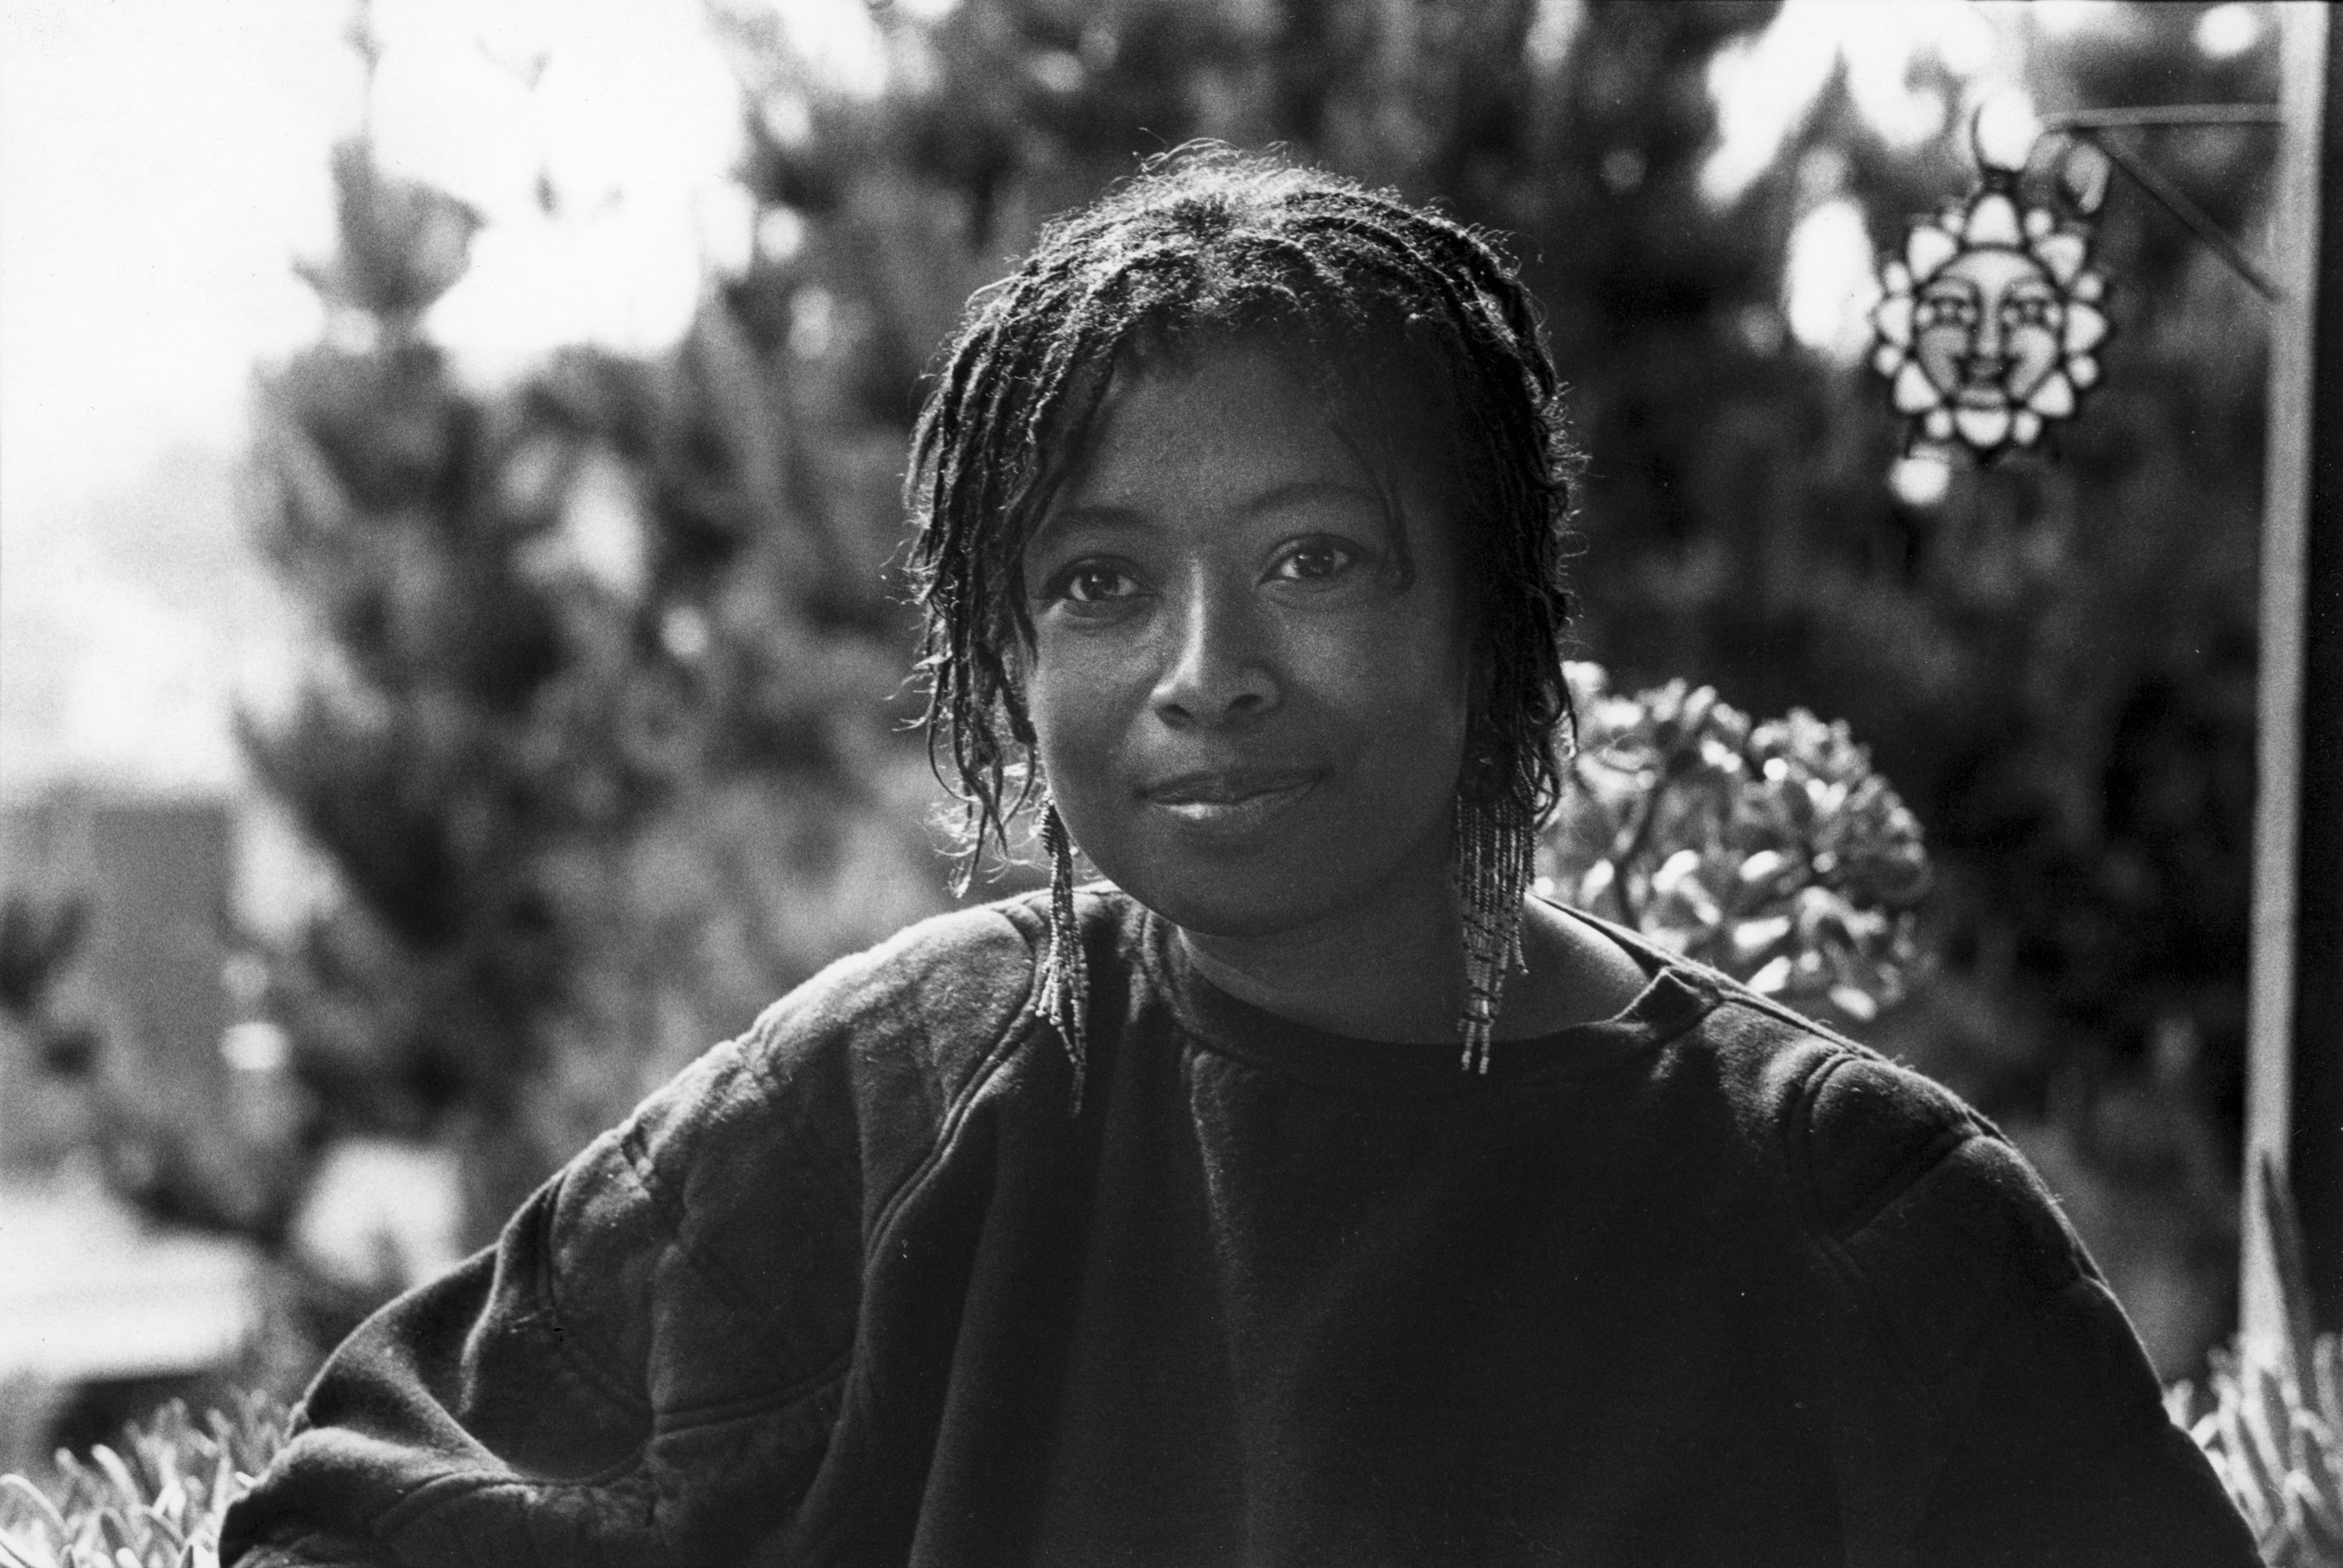 Alice Walker , Best known for her novel 'The Color Purple', poses for portrait at home in San Francisco in January, 1985. | Photo by Mikki Ansin/Getty Images